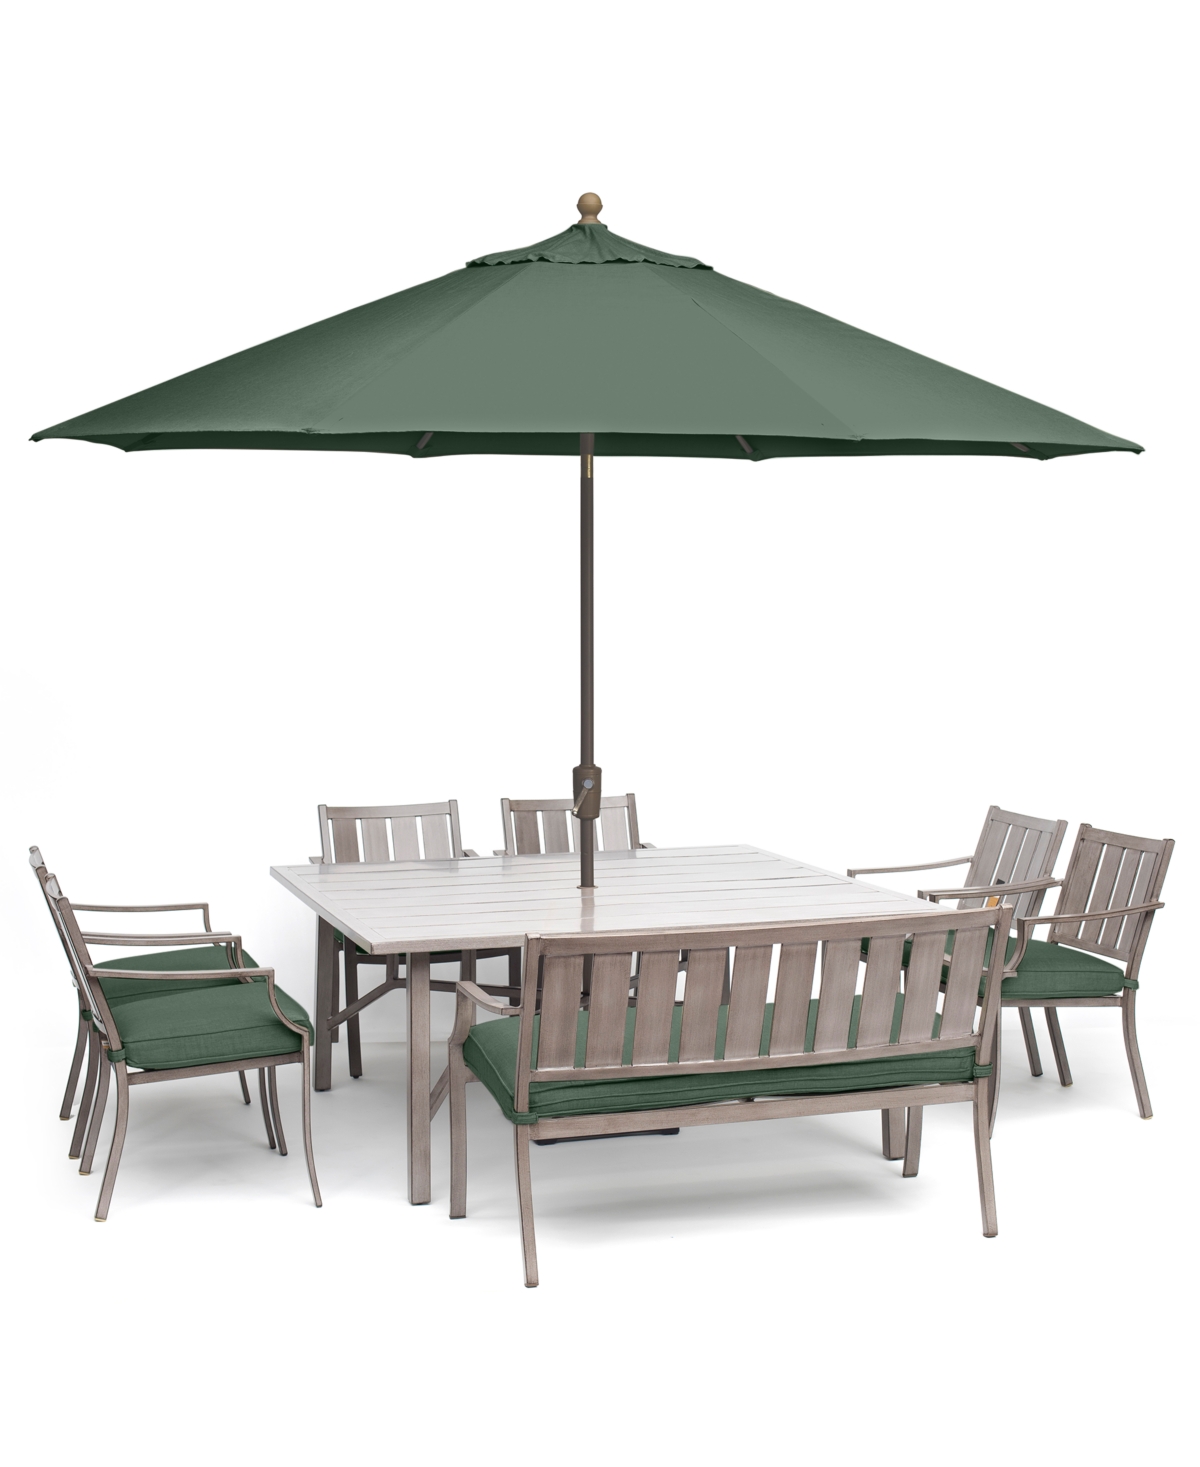 Agio Wayland Outdoor Aluminum 8-pc. Dining Set (64" Square Dining Table, 6 Dining Chairs & 1 Bench), Crea In Outdura Grasshopper